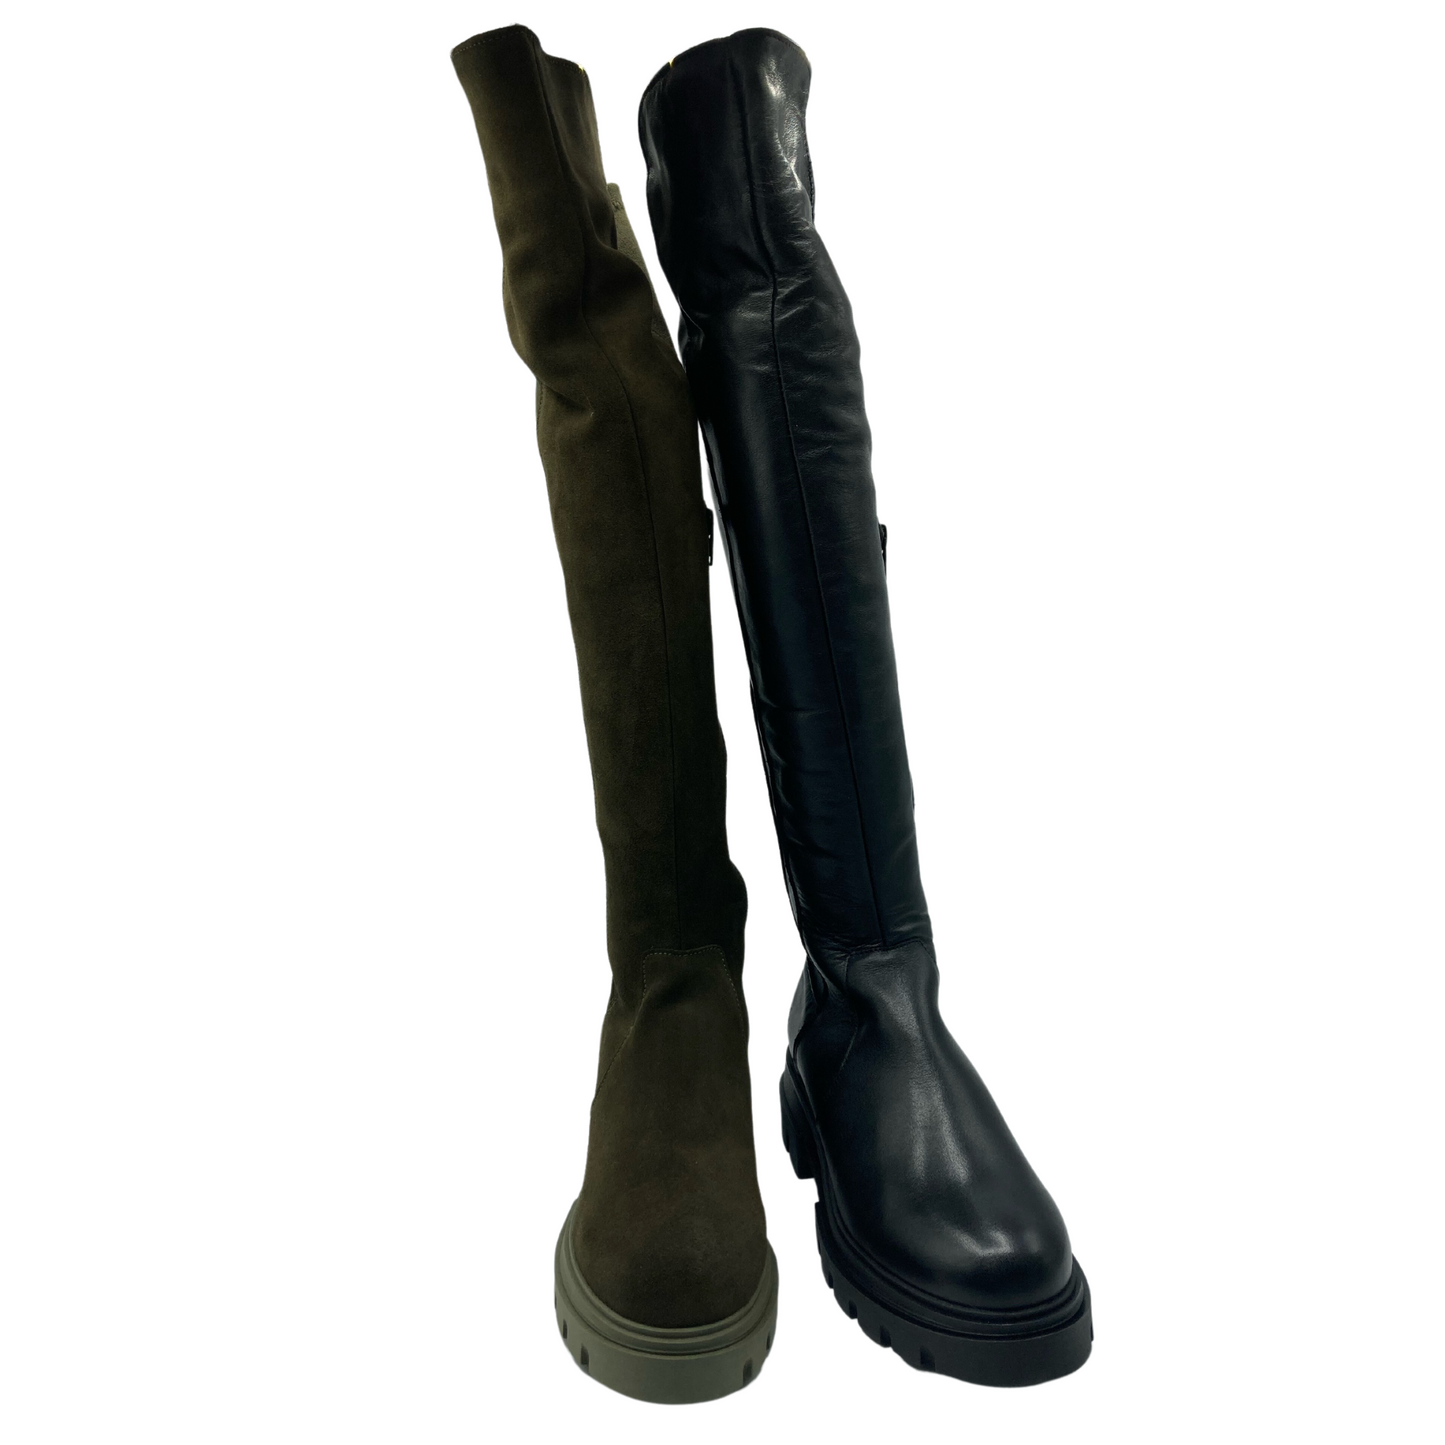 View of two thigh high boots side by side. The one on the left is khaki suede and the one on the right is black leather. Both are thigh high and both have platform soles